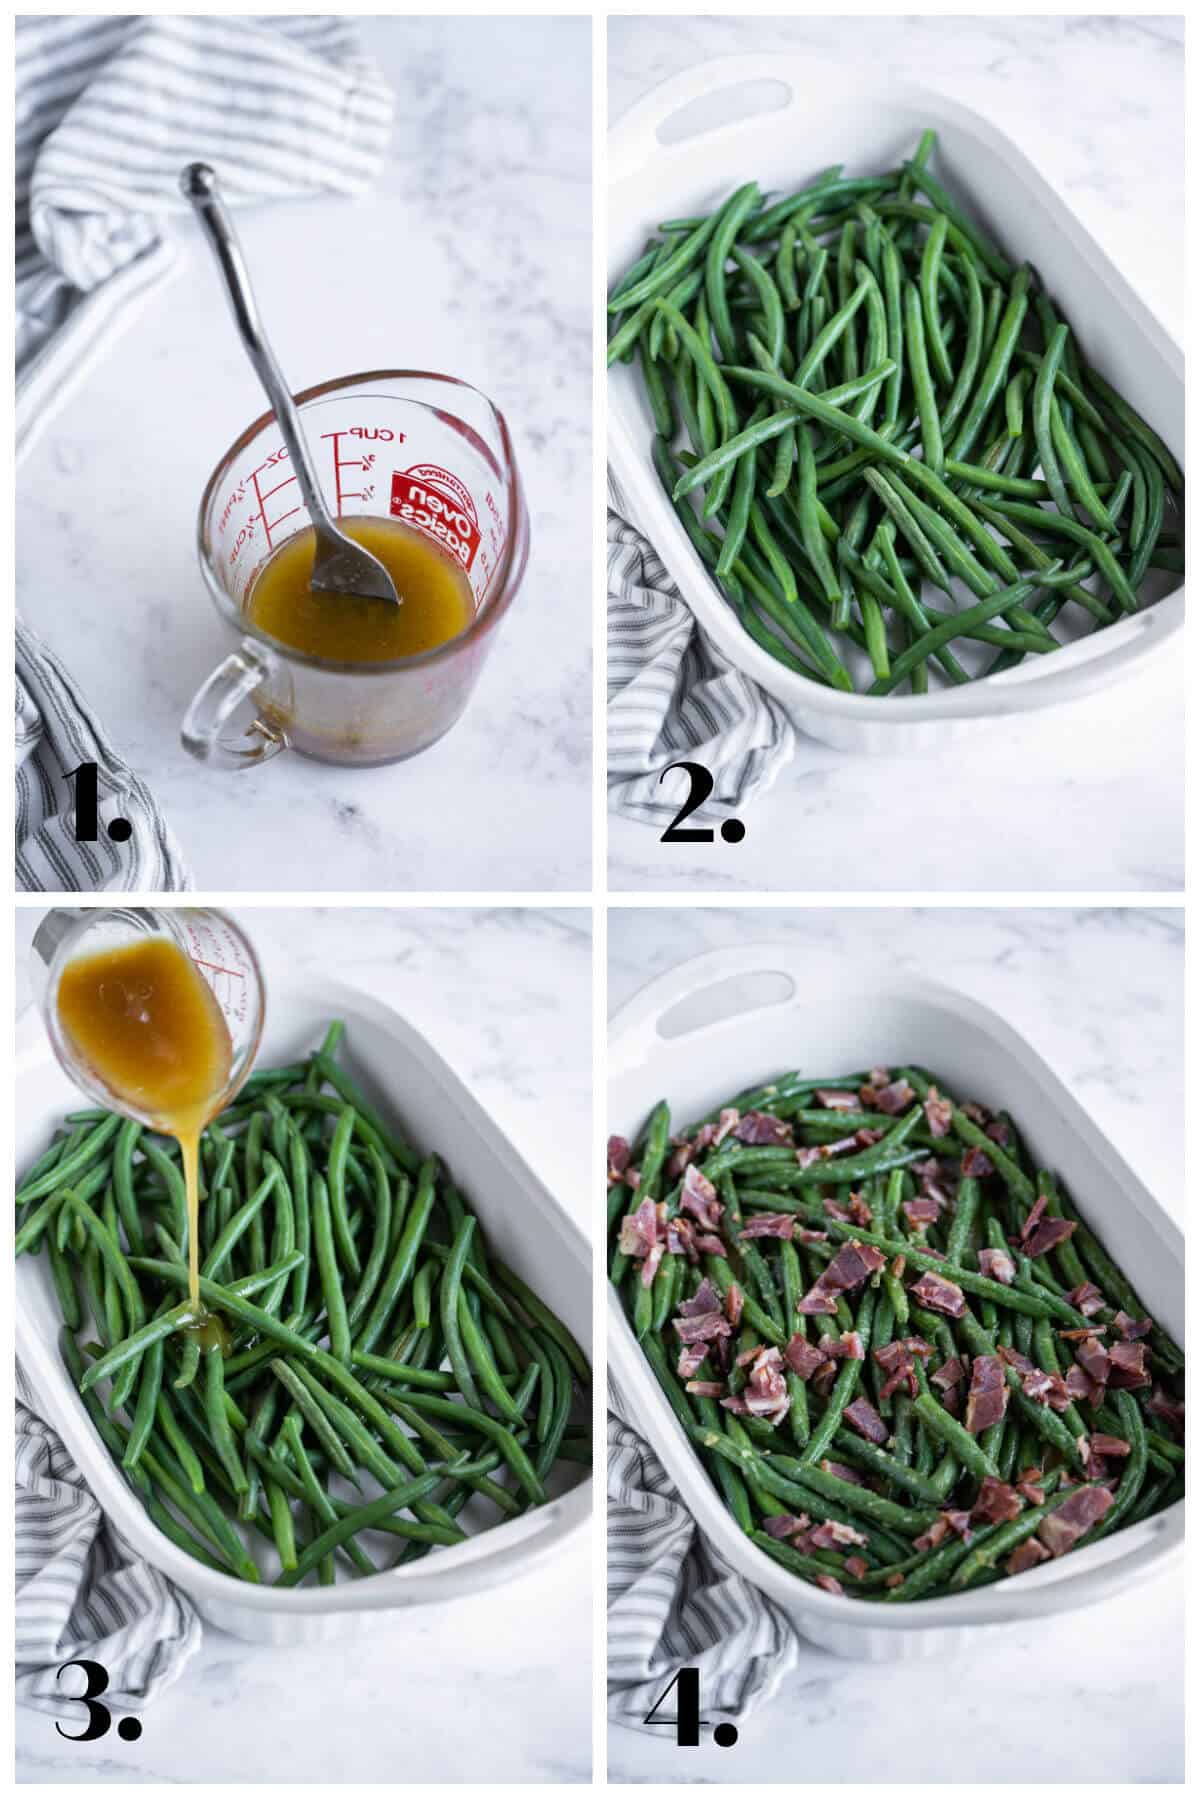 four image collage showing how to assemble Arkansas Green Beans recipe.